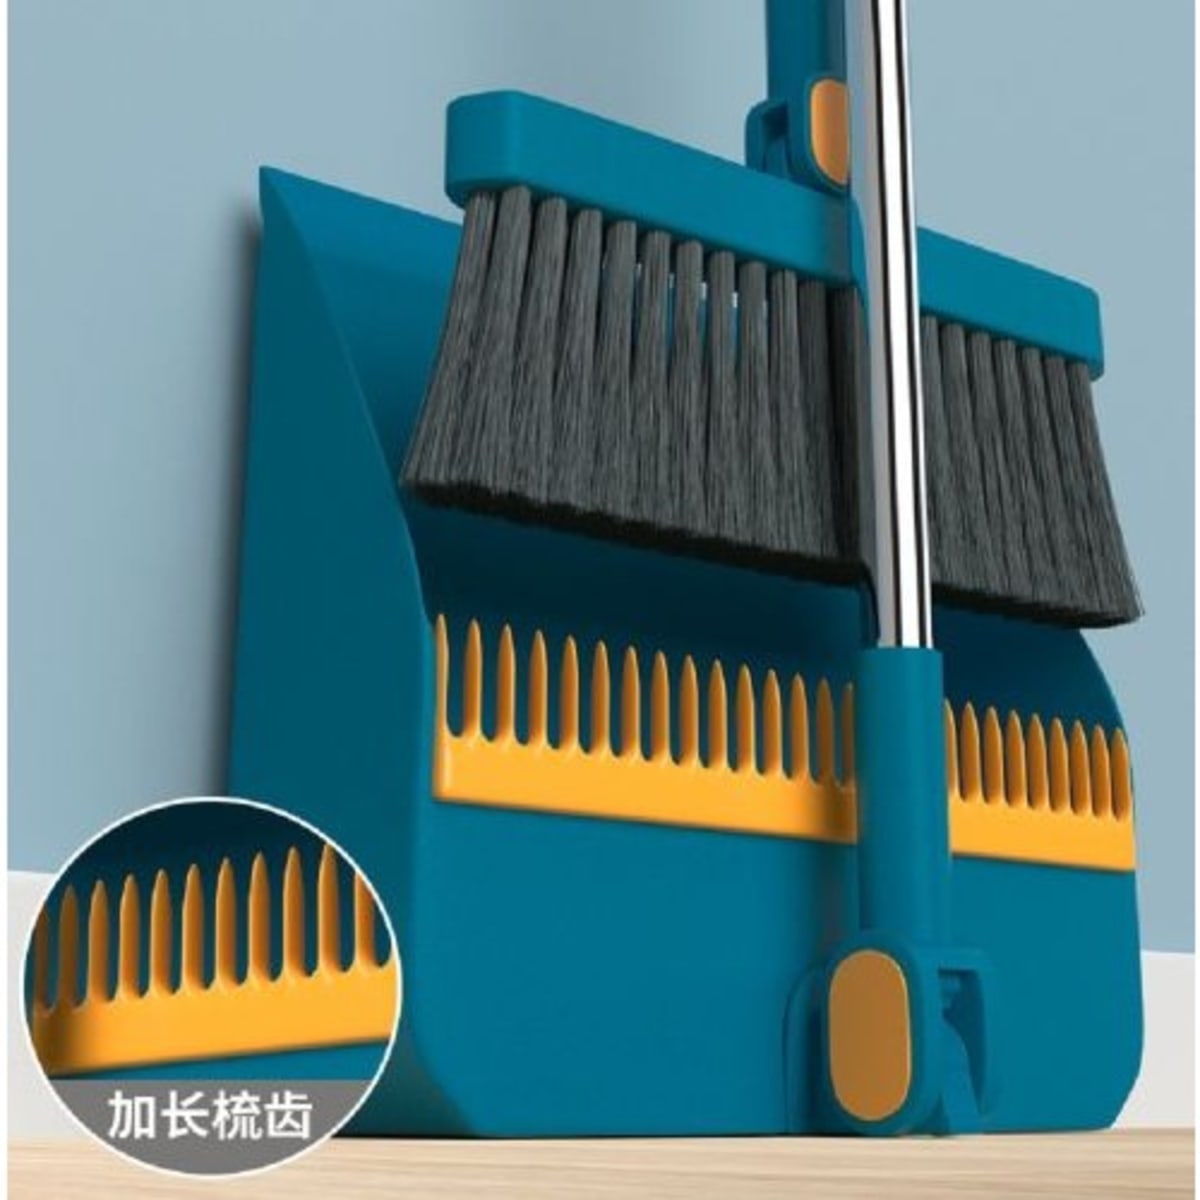 Foldable Packer And Brush - 2in1